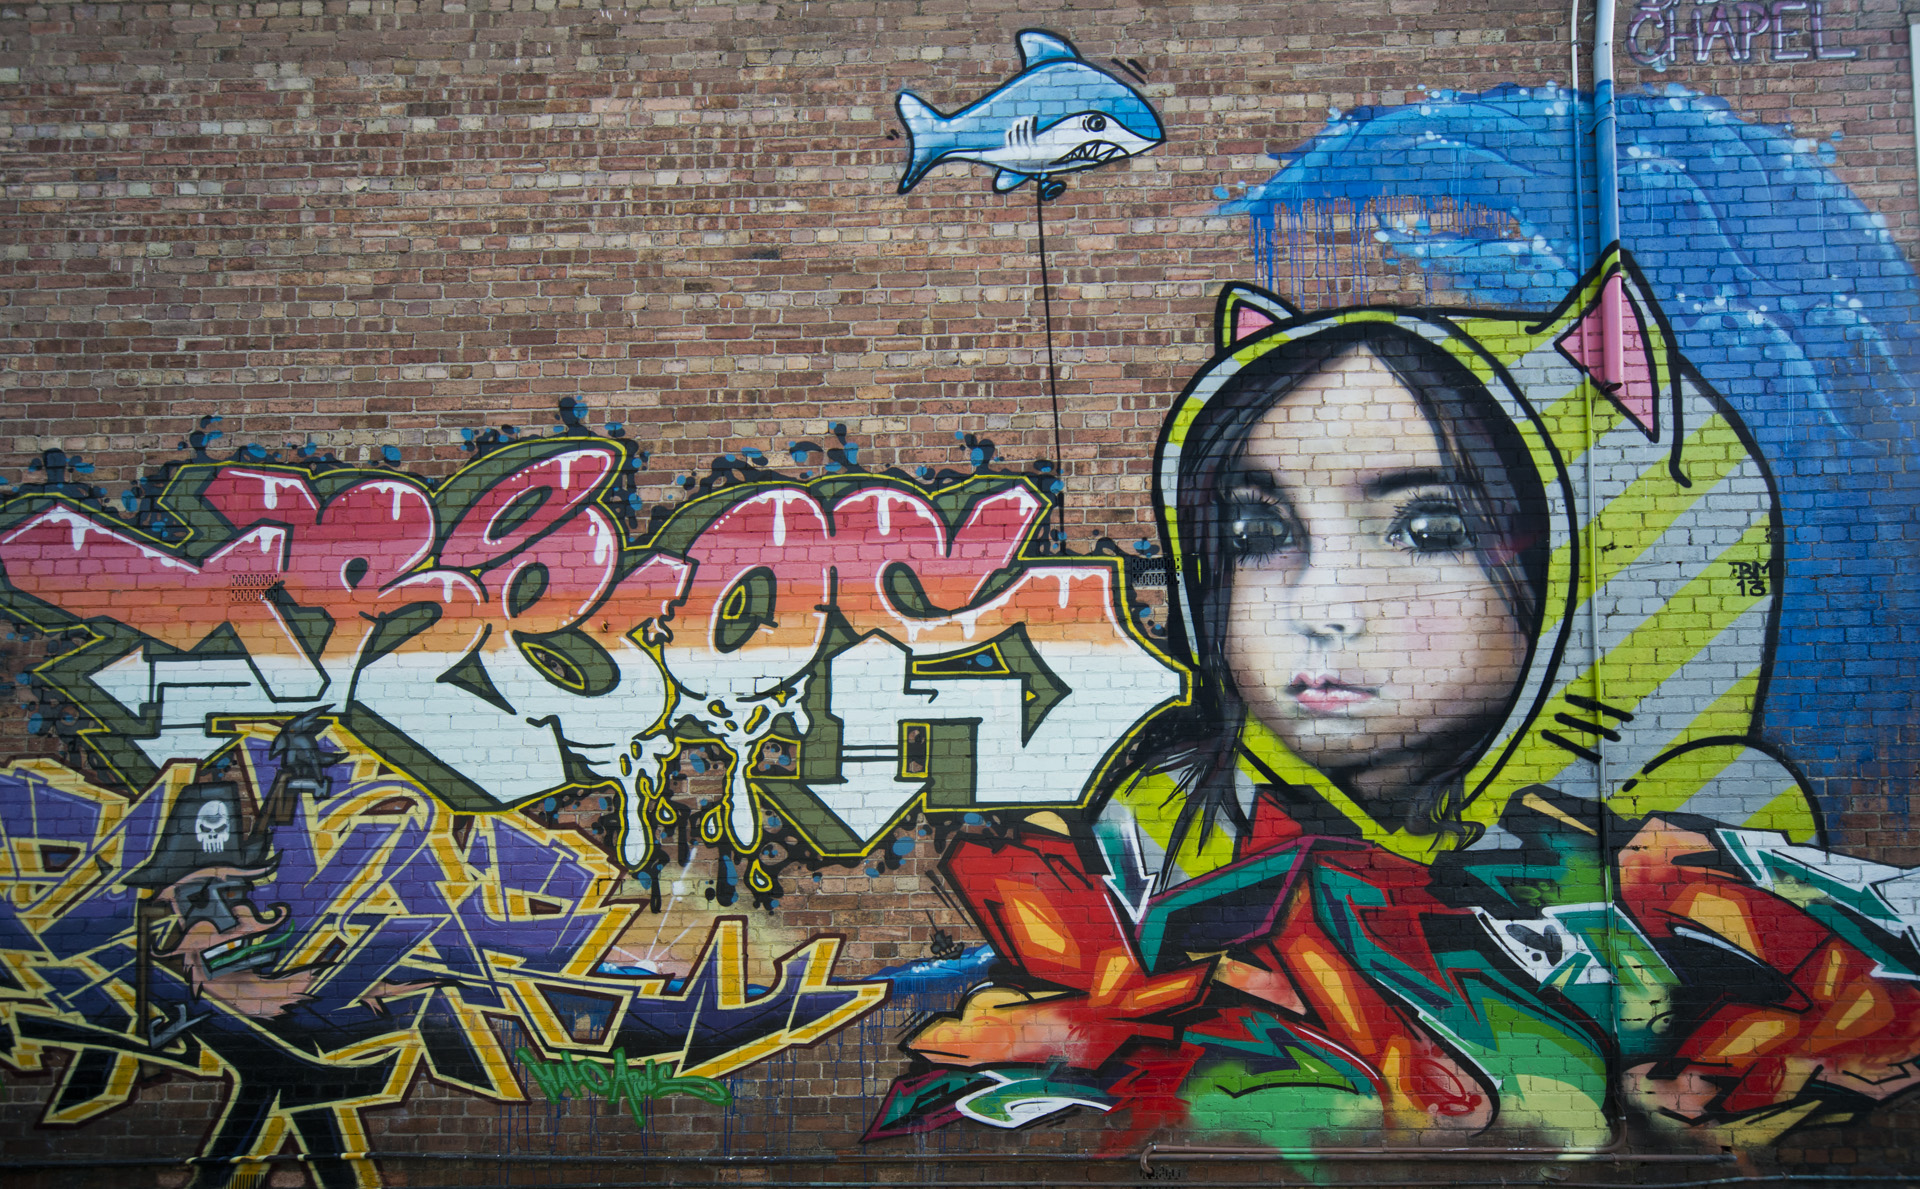 graffiti is on a building, a girl wearing a yellow hoodie